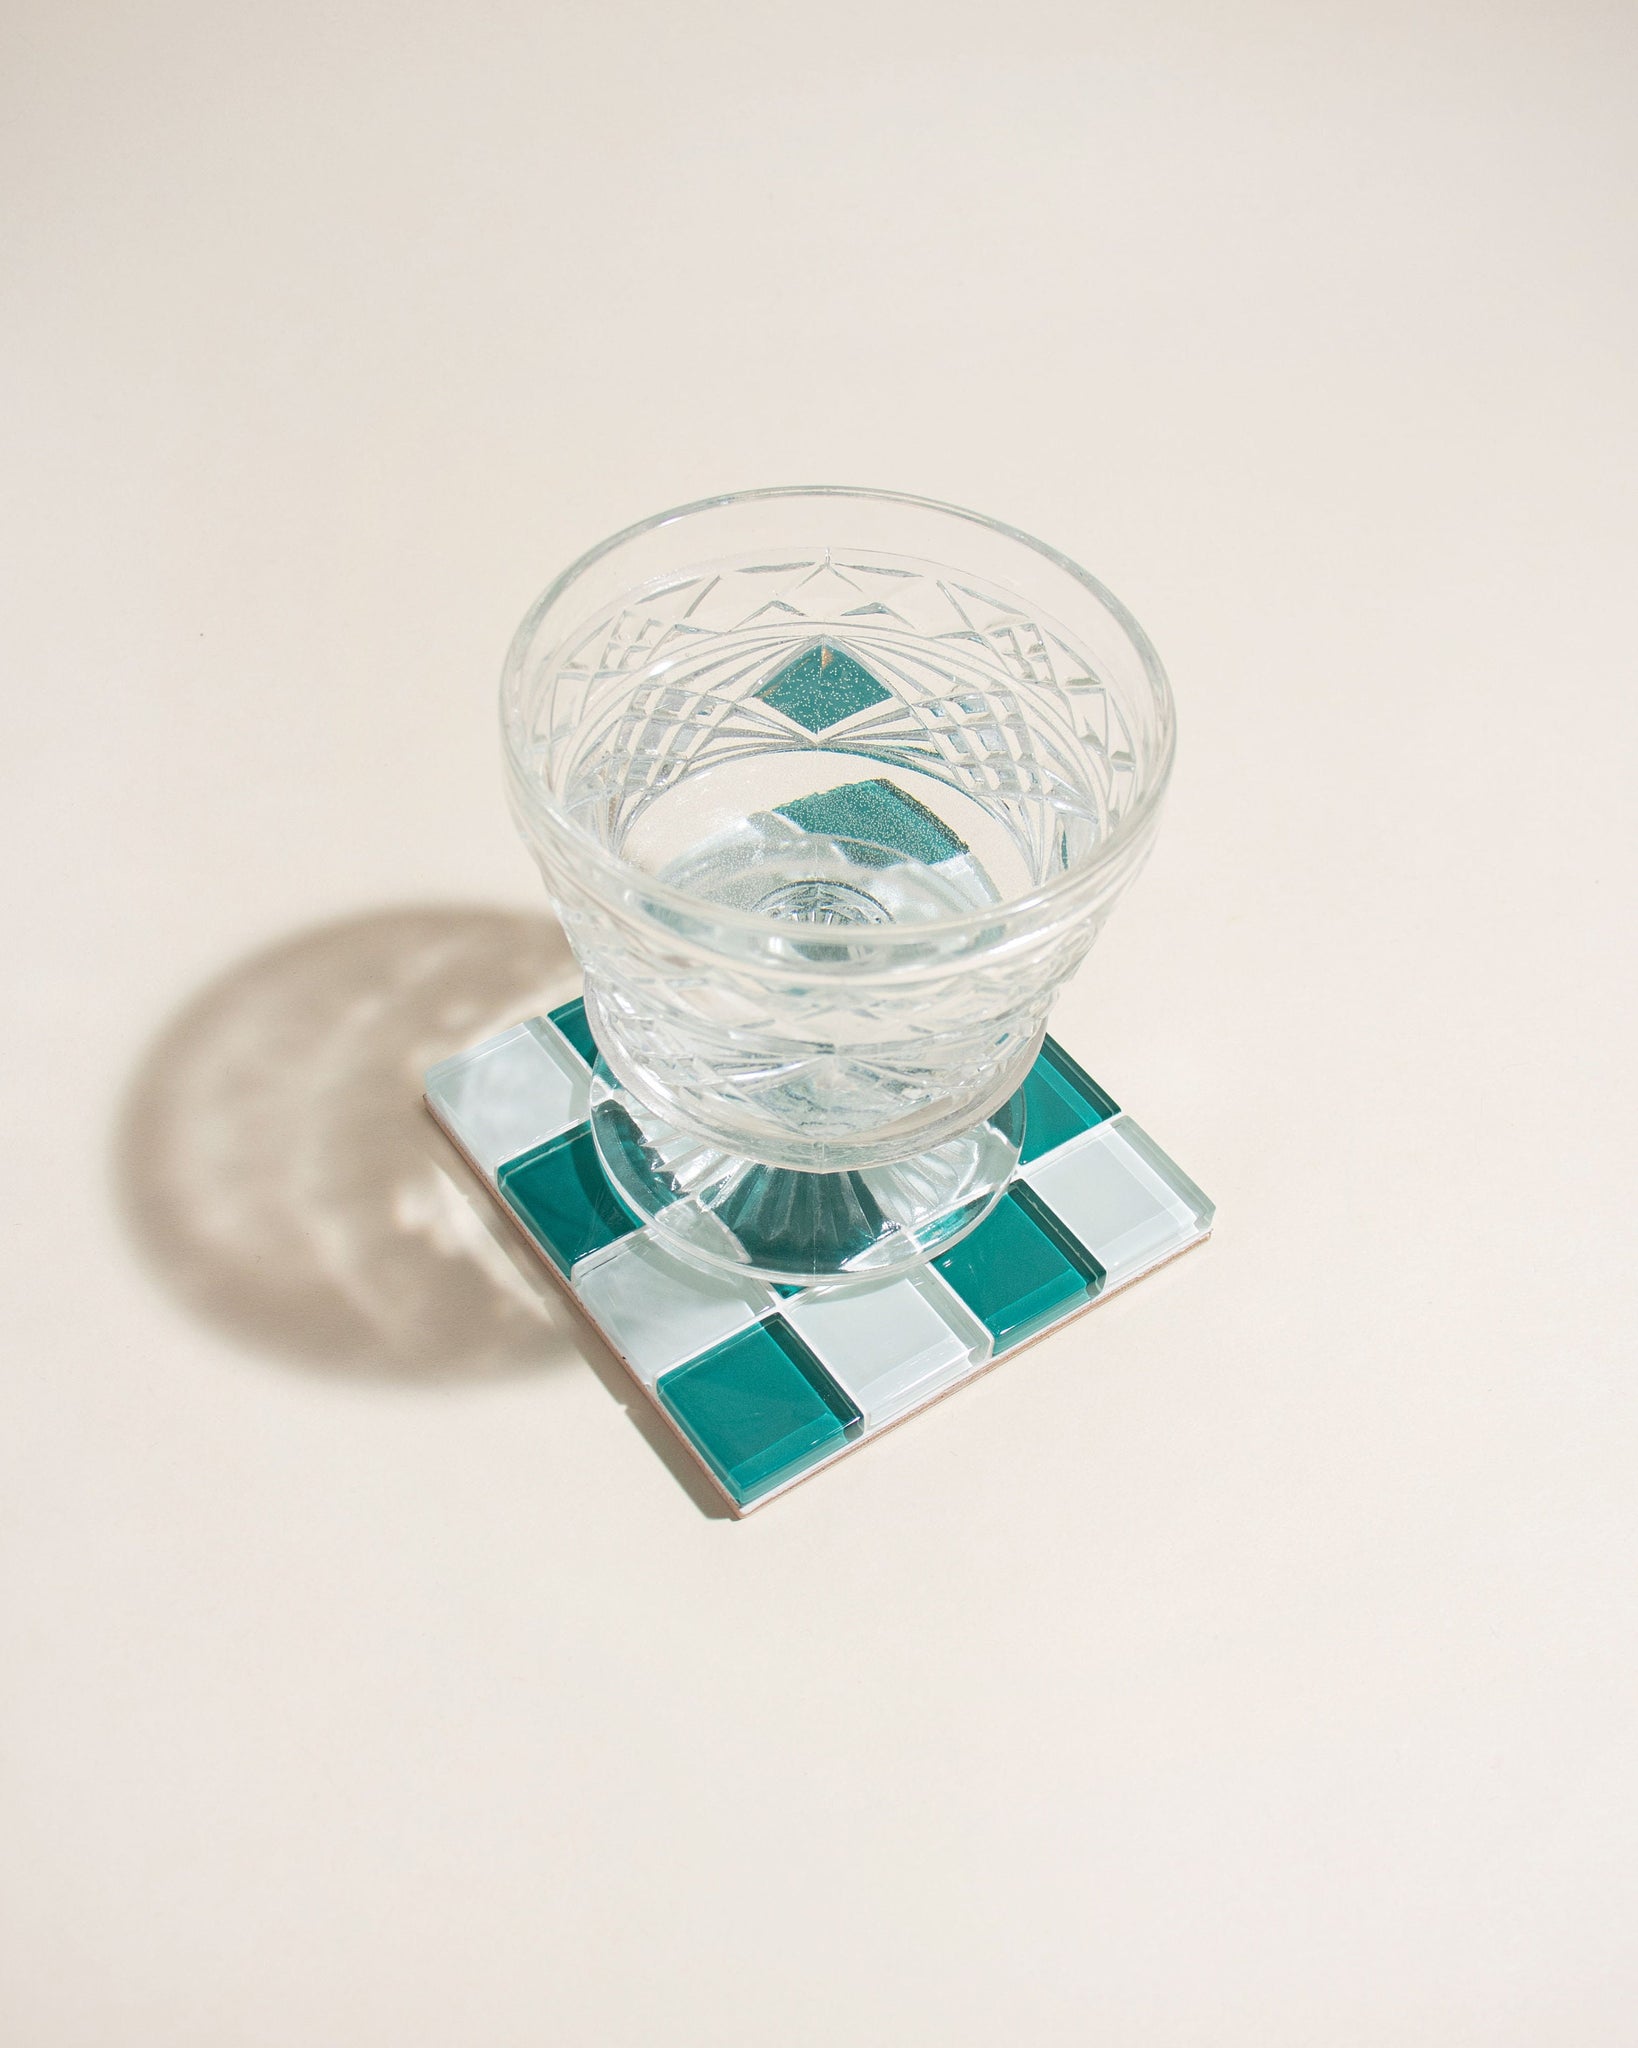 Checkered Drink Coaster Set of 4, Glass Tile Coasters Set of 4